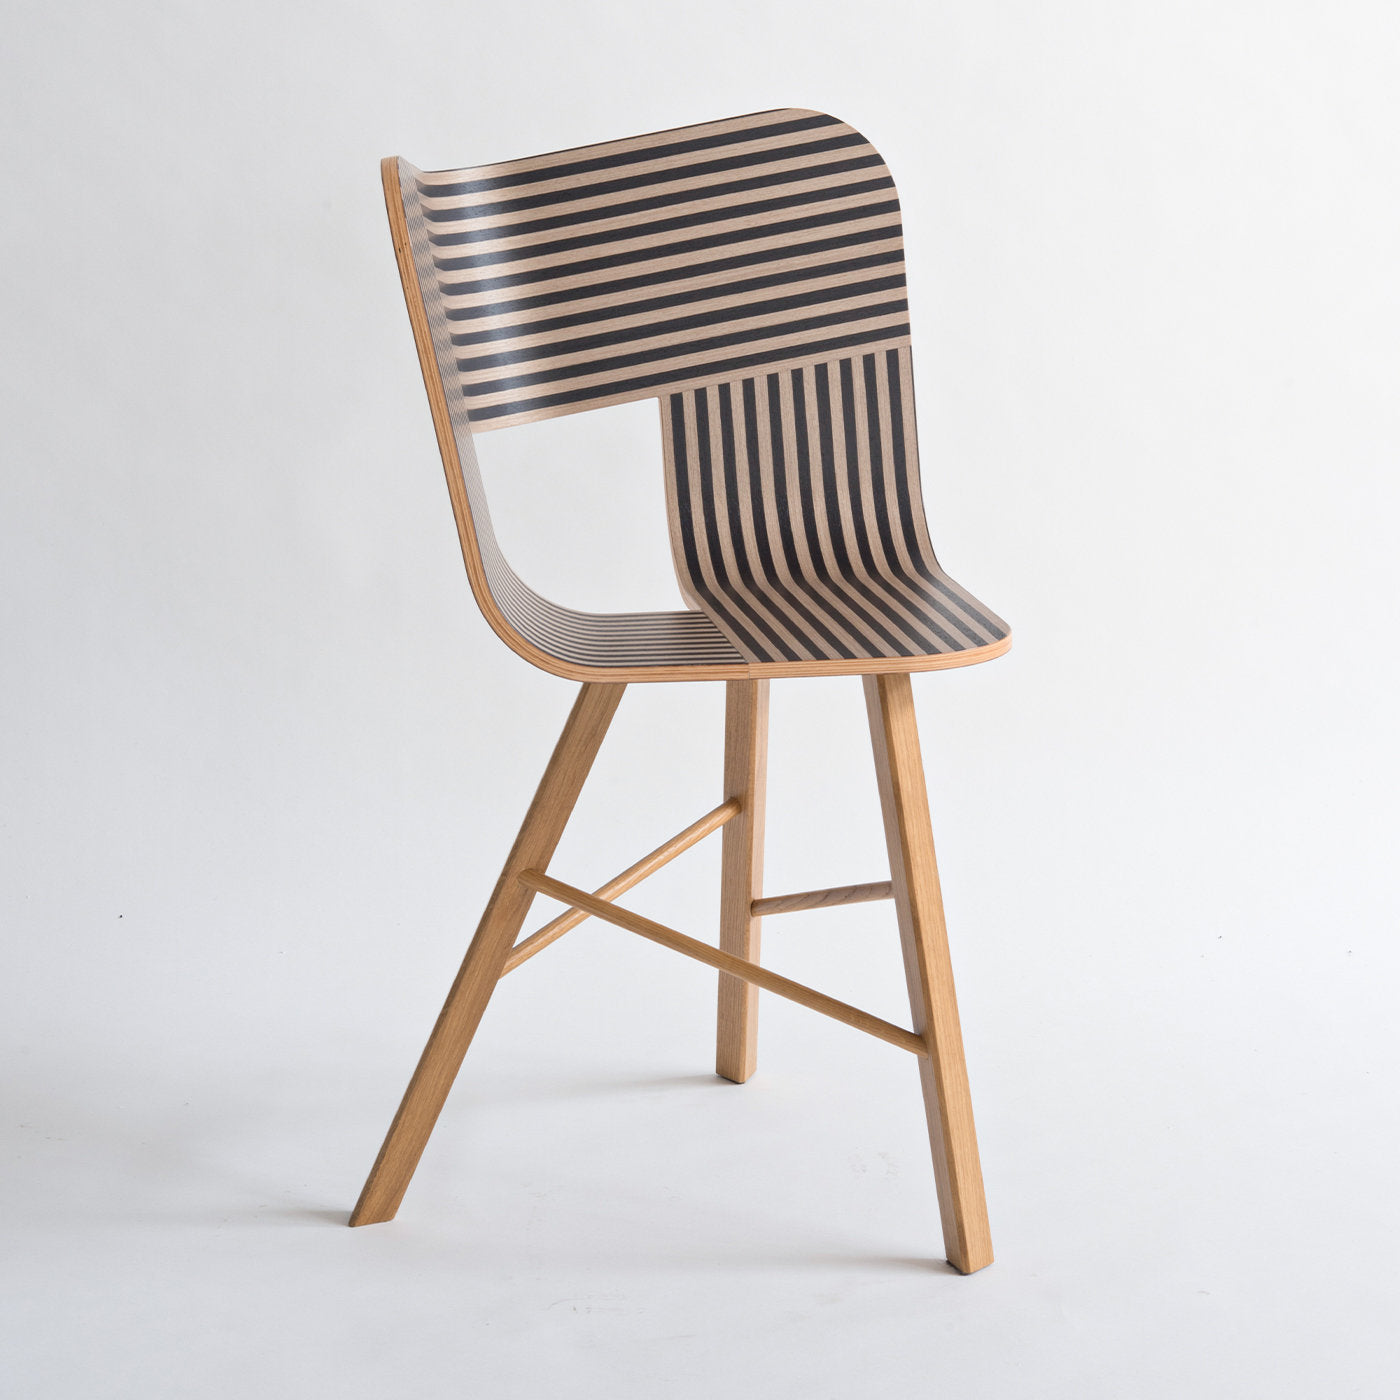 Tria Wood 4 Chair in Ivory and Black - Alternative view 1